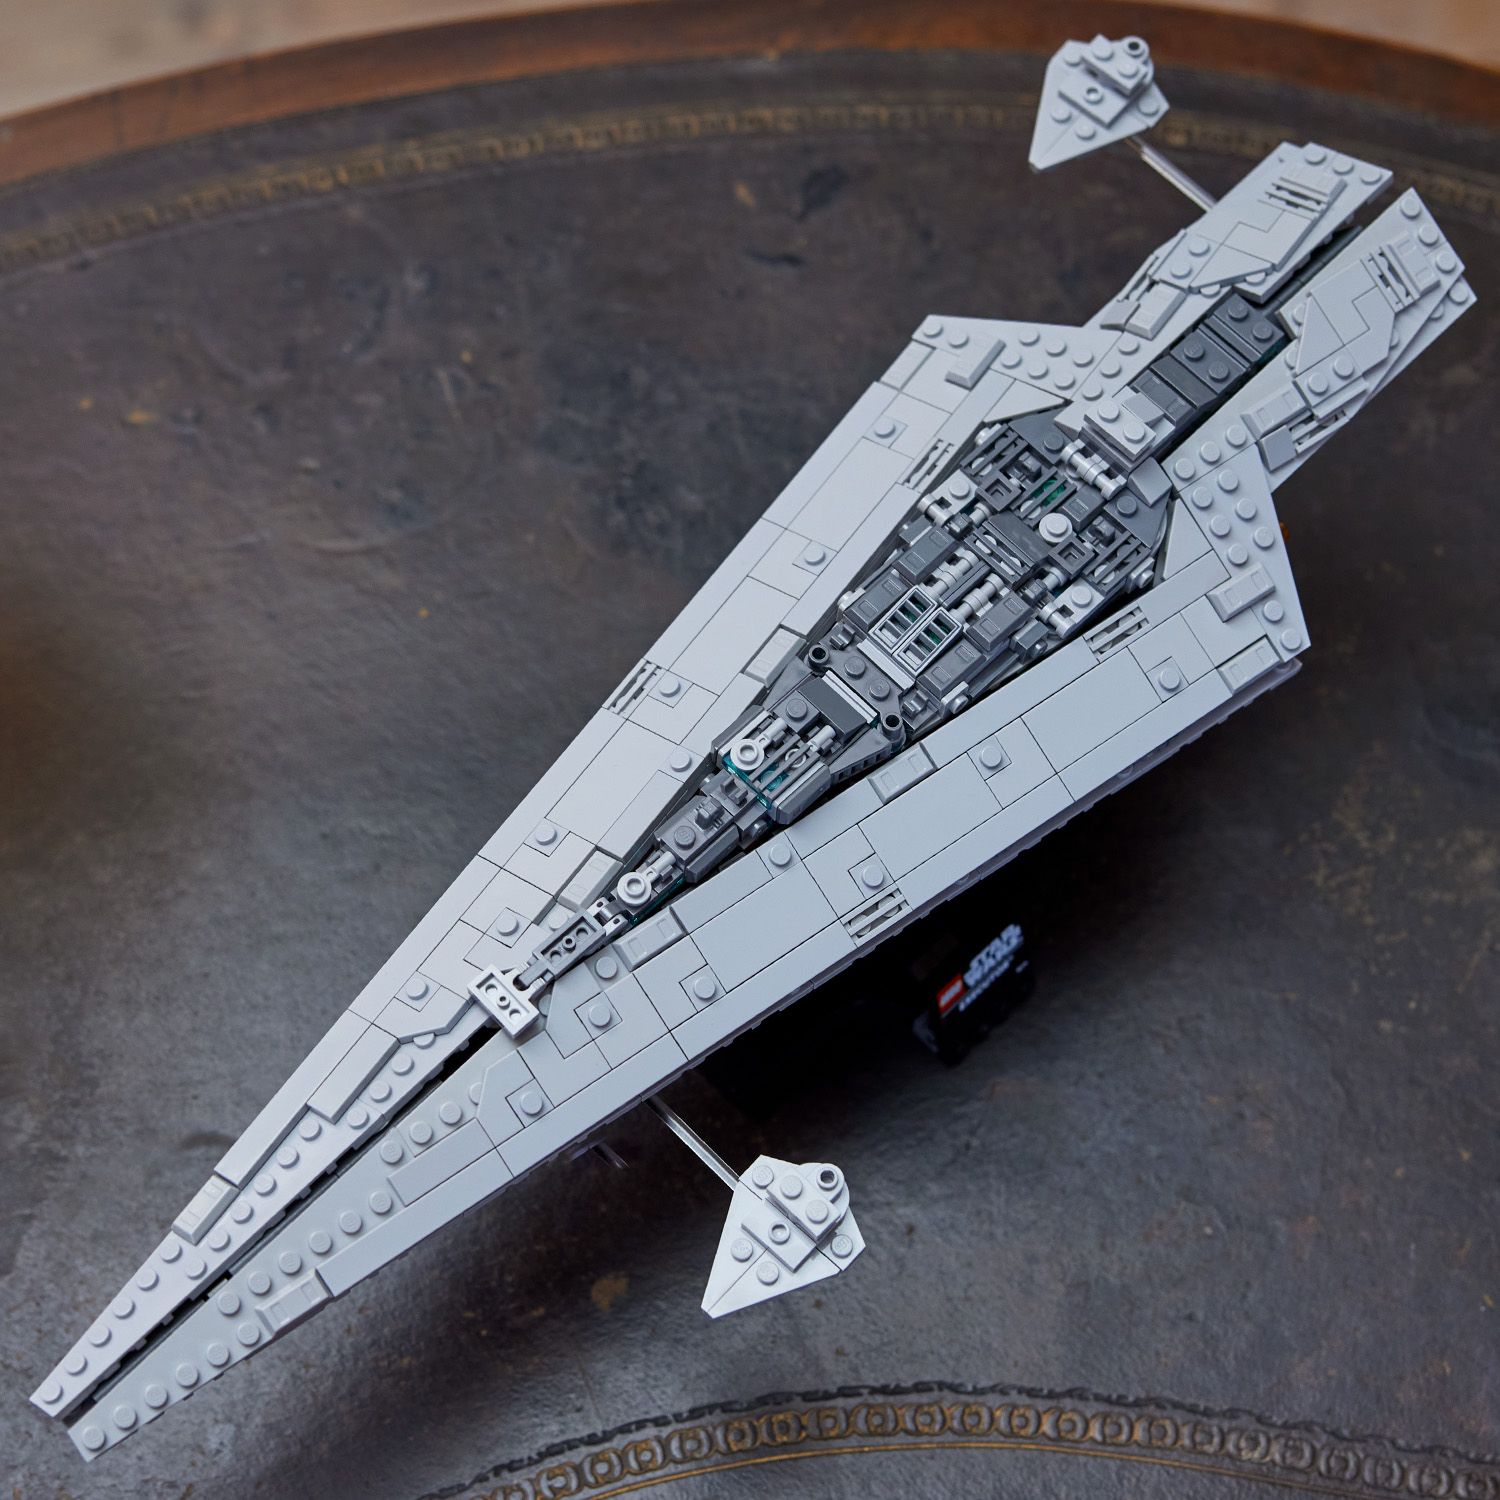 LEGO unveils 75356 Executor Super Star Destroyer as the latest micro-scale  collectible [News] - The Brothers Brick